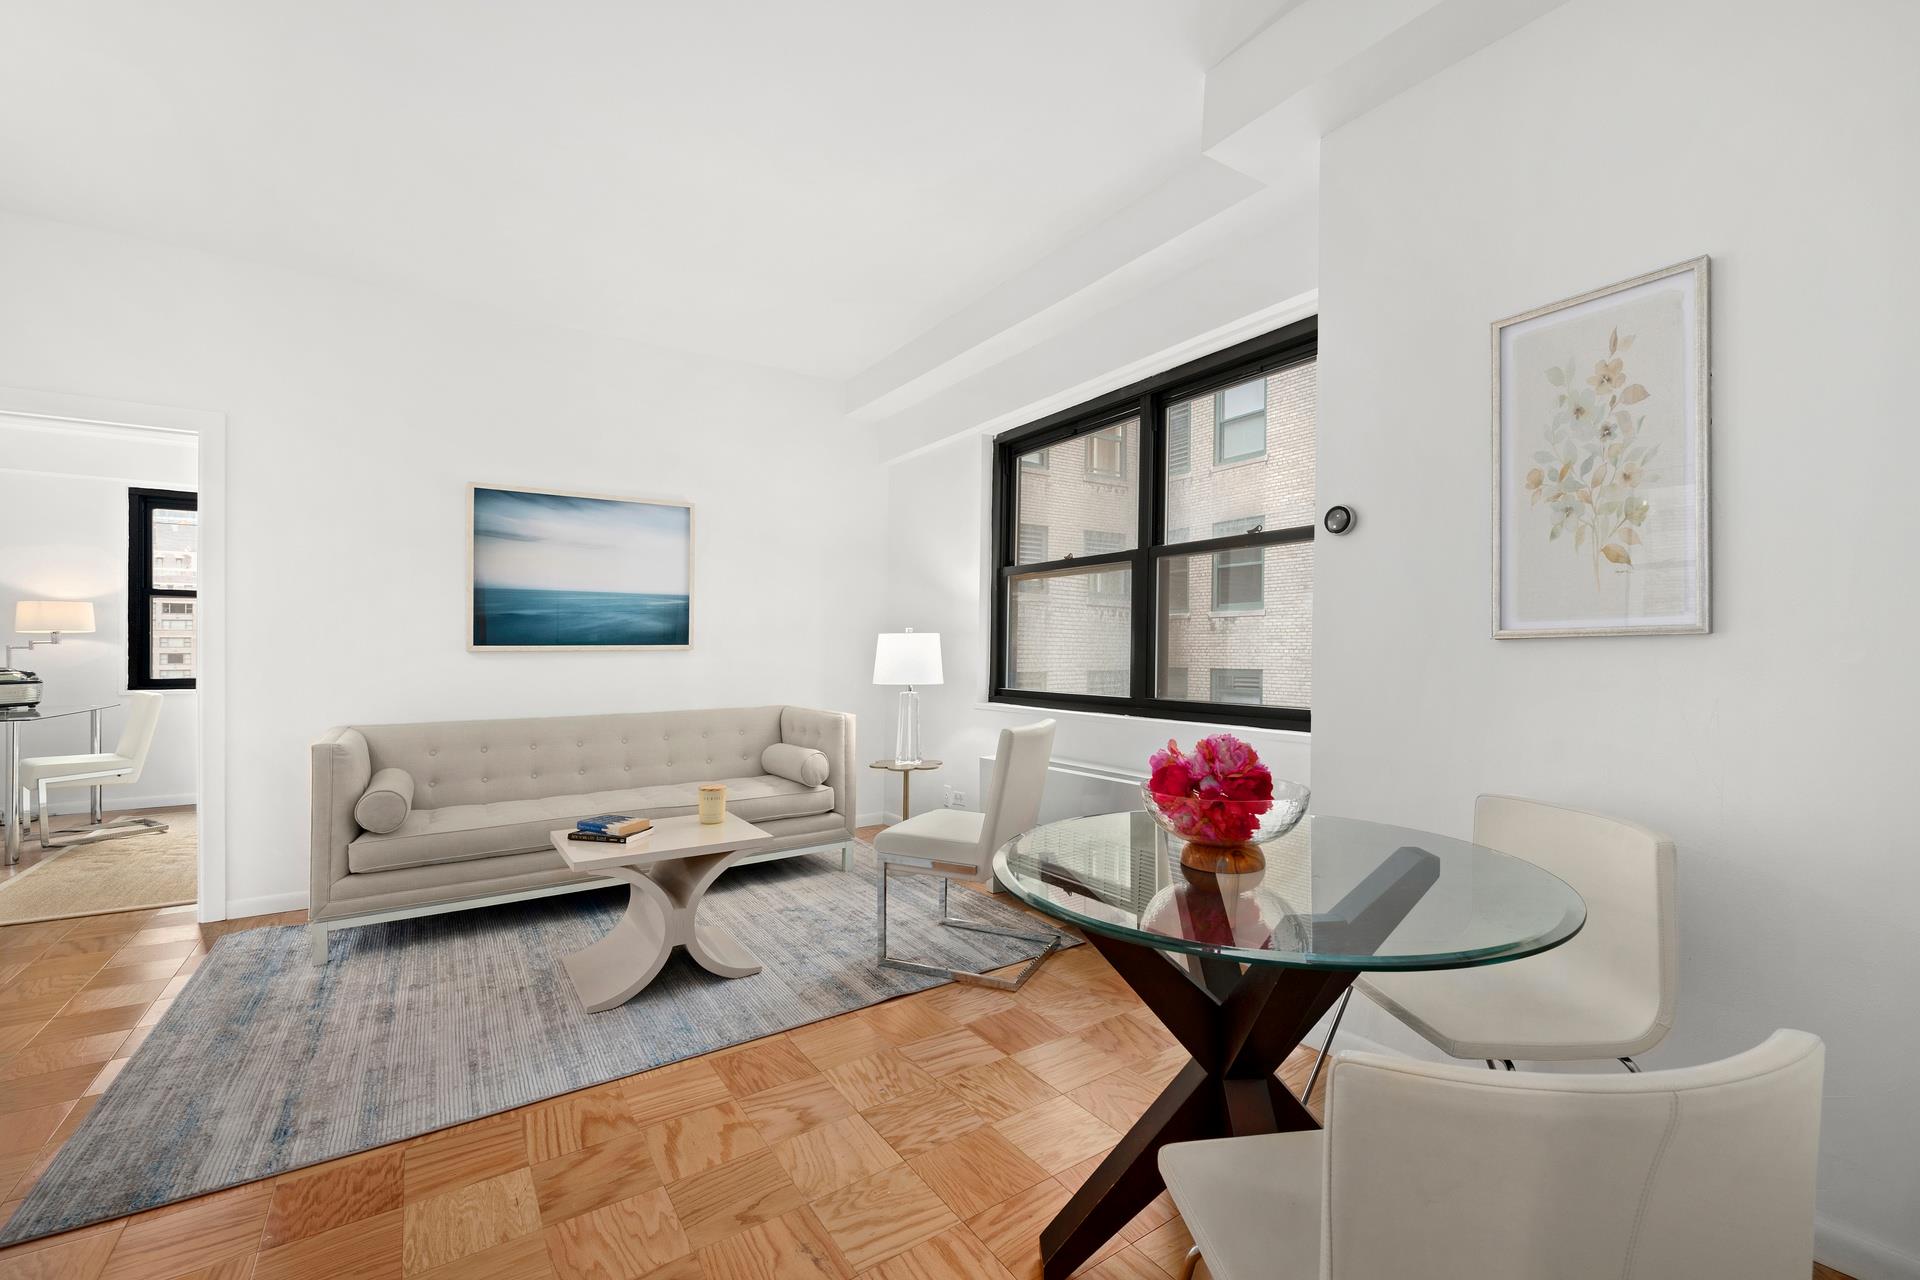 58 West 58th Street 9F, Central Park South, Midtown West, NYC - 1 Bedrooms  
1 Bathrooms  
4 Rooms - 